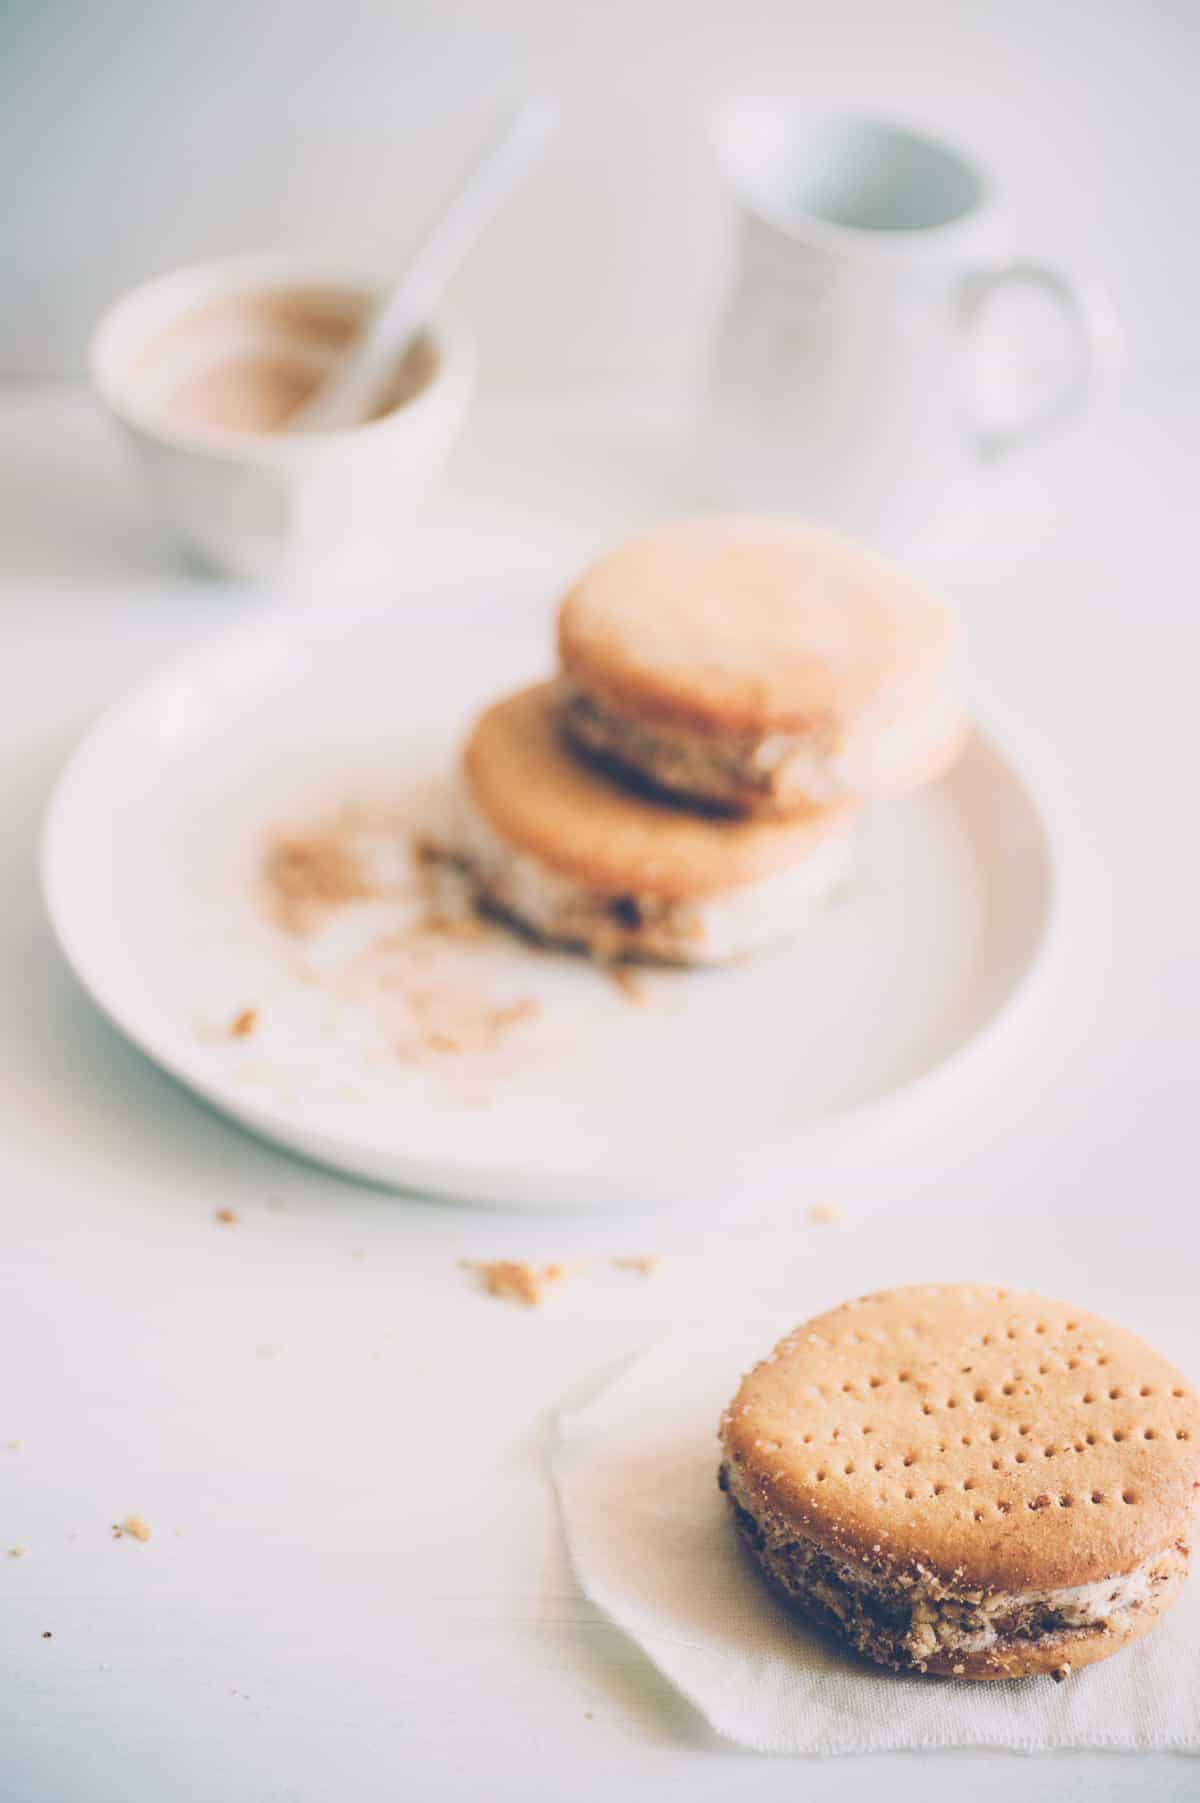 three ice cream sandwiches made with cinnamon ice cream - all three are on a white surface